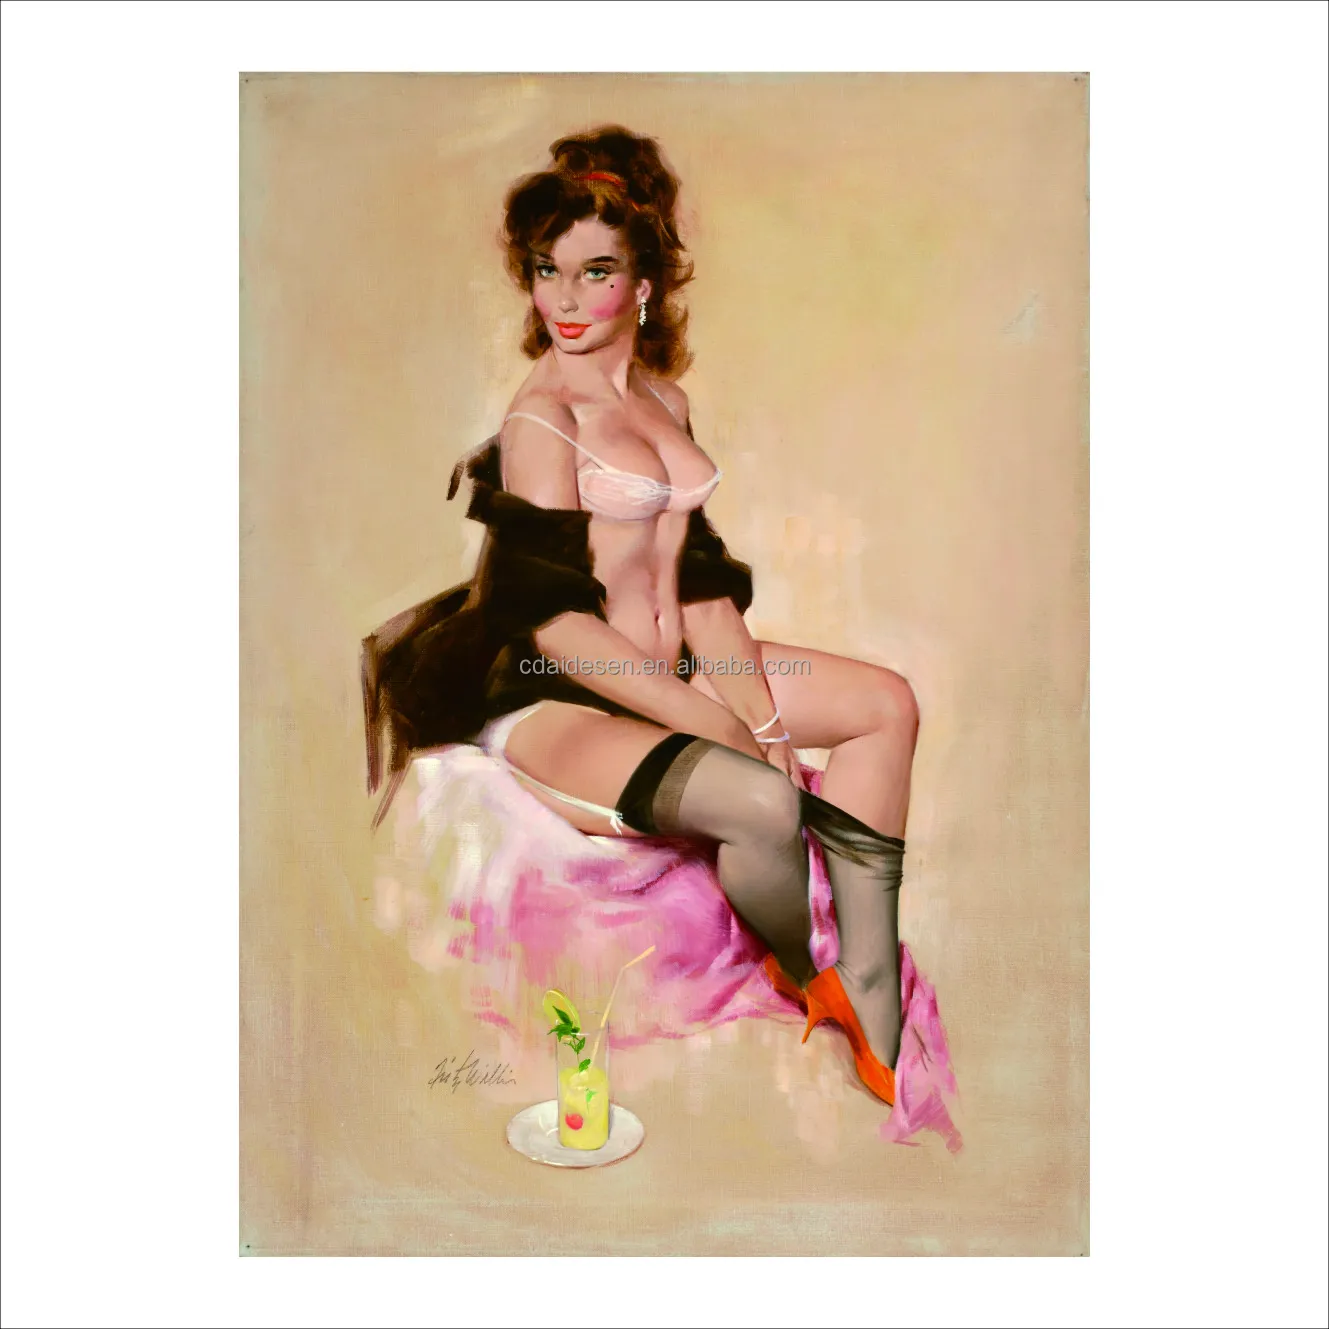 1329px x 1329px - Mindblowing Women Nude Figures Wall Art Oil Painting On Canvas Erotic  Modern Portrait Home Decoration Wall Art - Buy Xxxx Art And Craft For Waste  Materials Gifts,Sexy Girl Figurines Statue Poster Craft,Porn